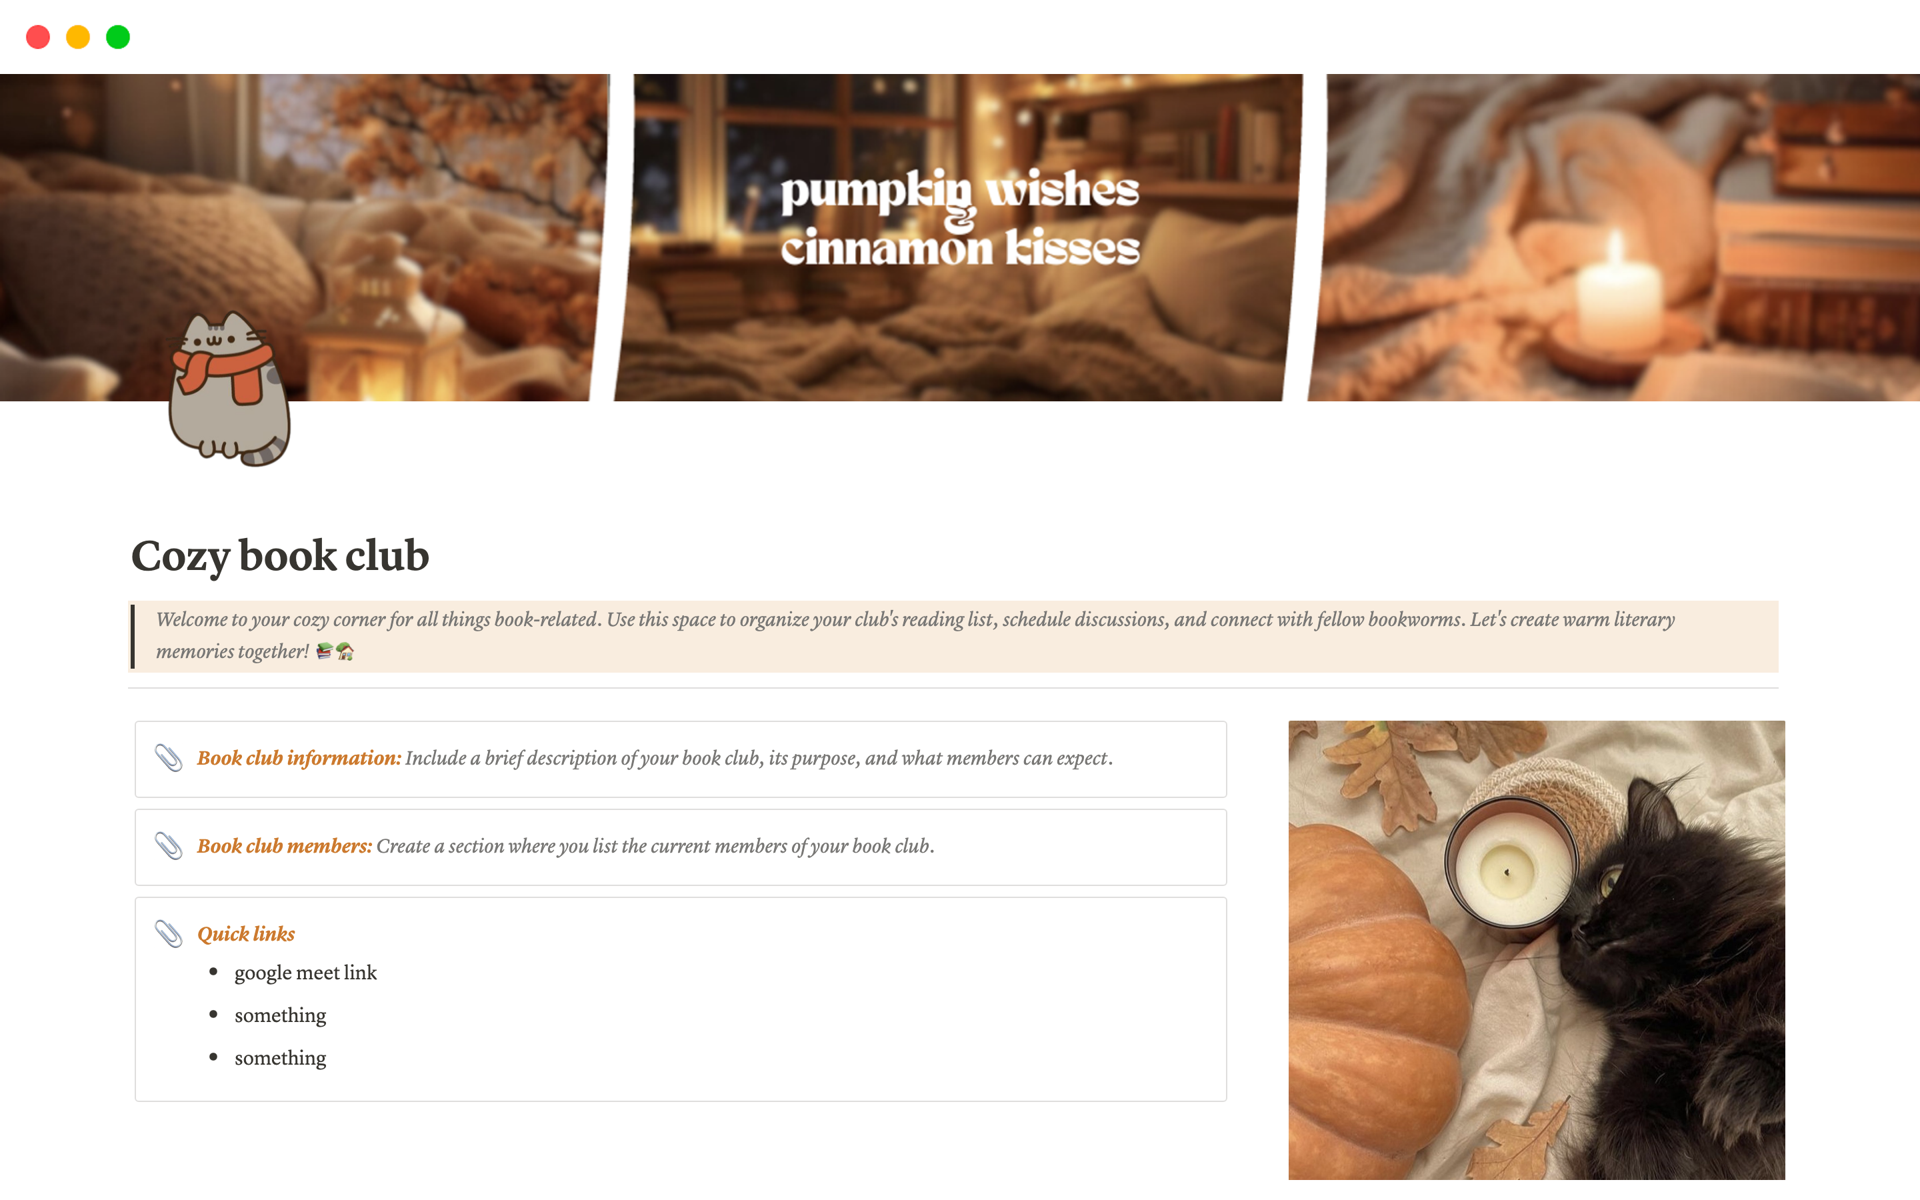 This template organizes your book club's activities with reading challenges, schedules, meeting notes, a discussion board, and book recommendations.